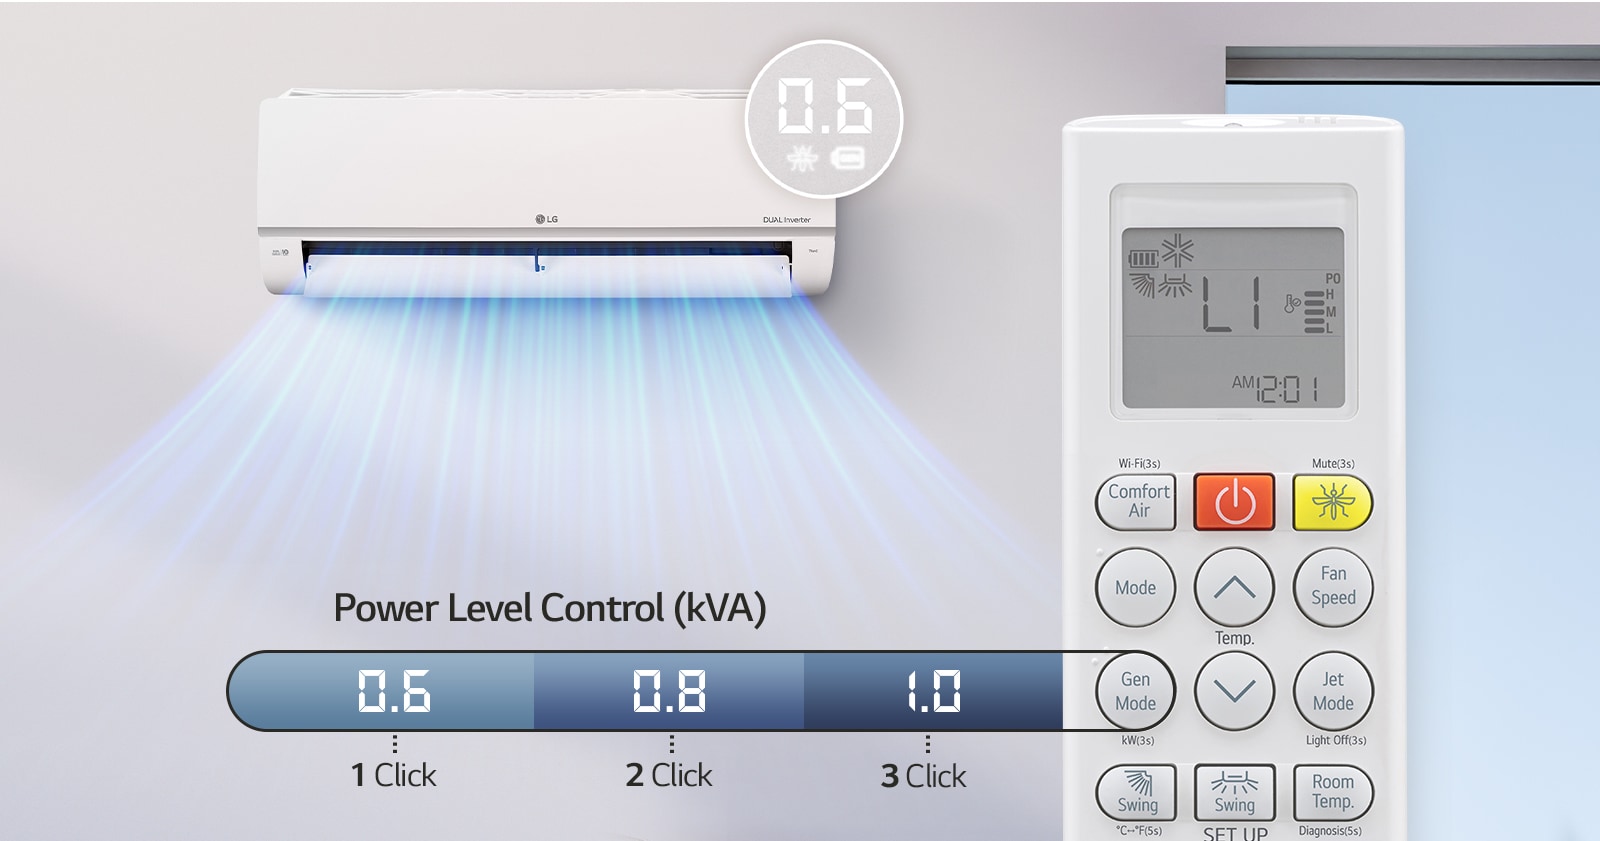 An air conditioner that allows setting the power in three steps via the remote control.